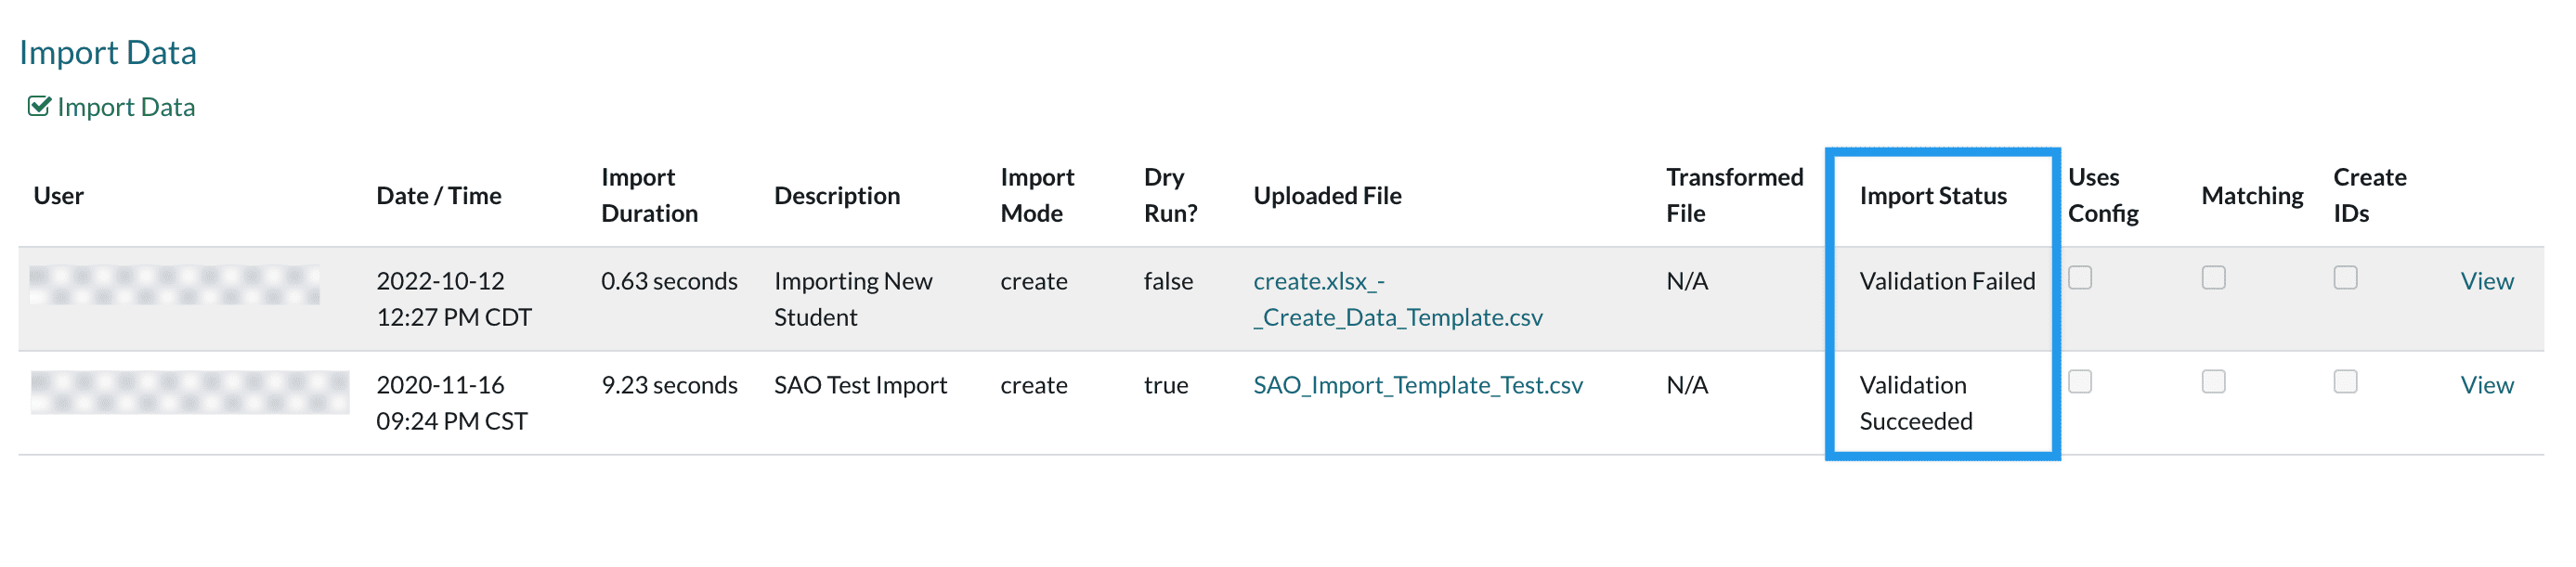 image of import validation page